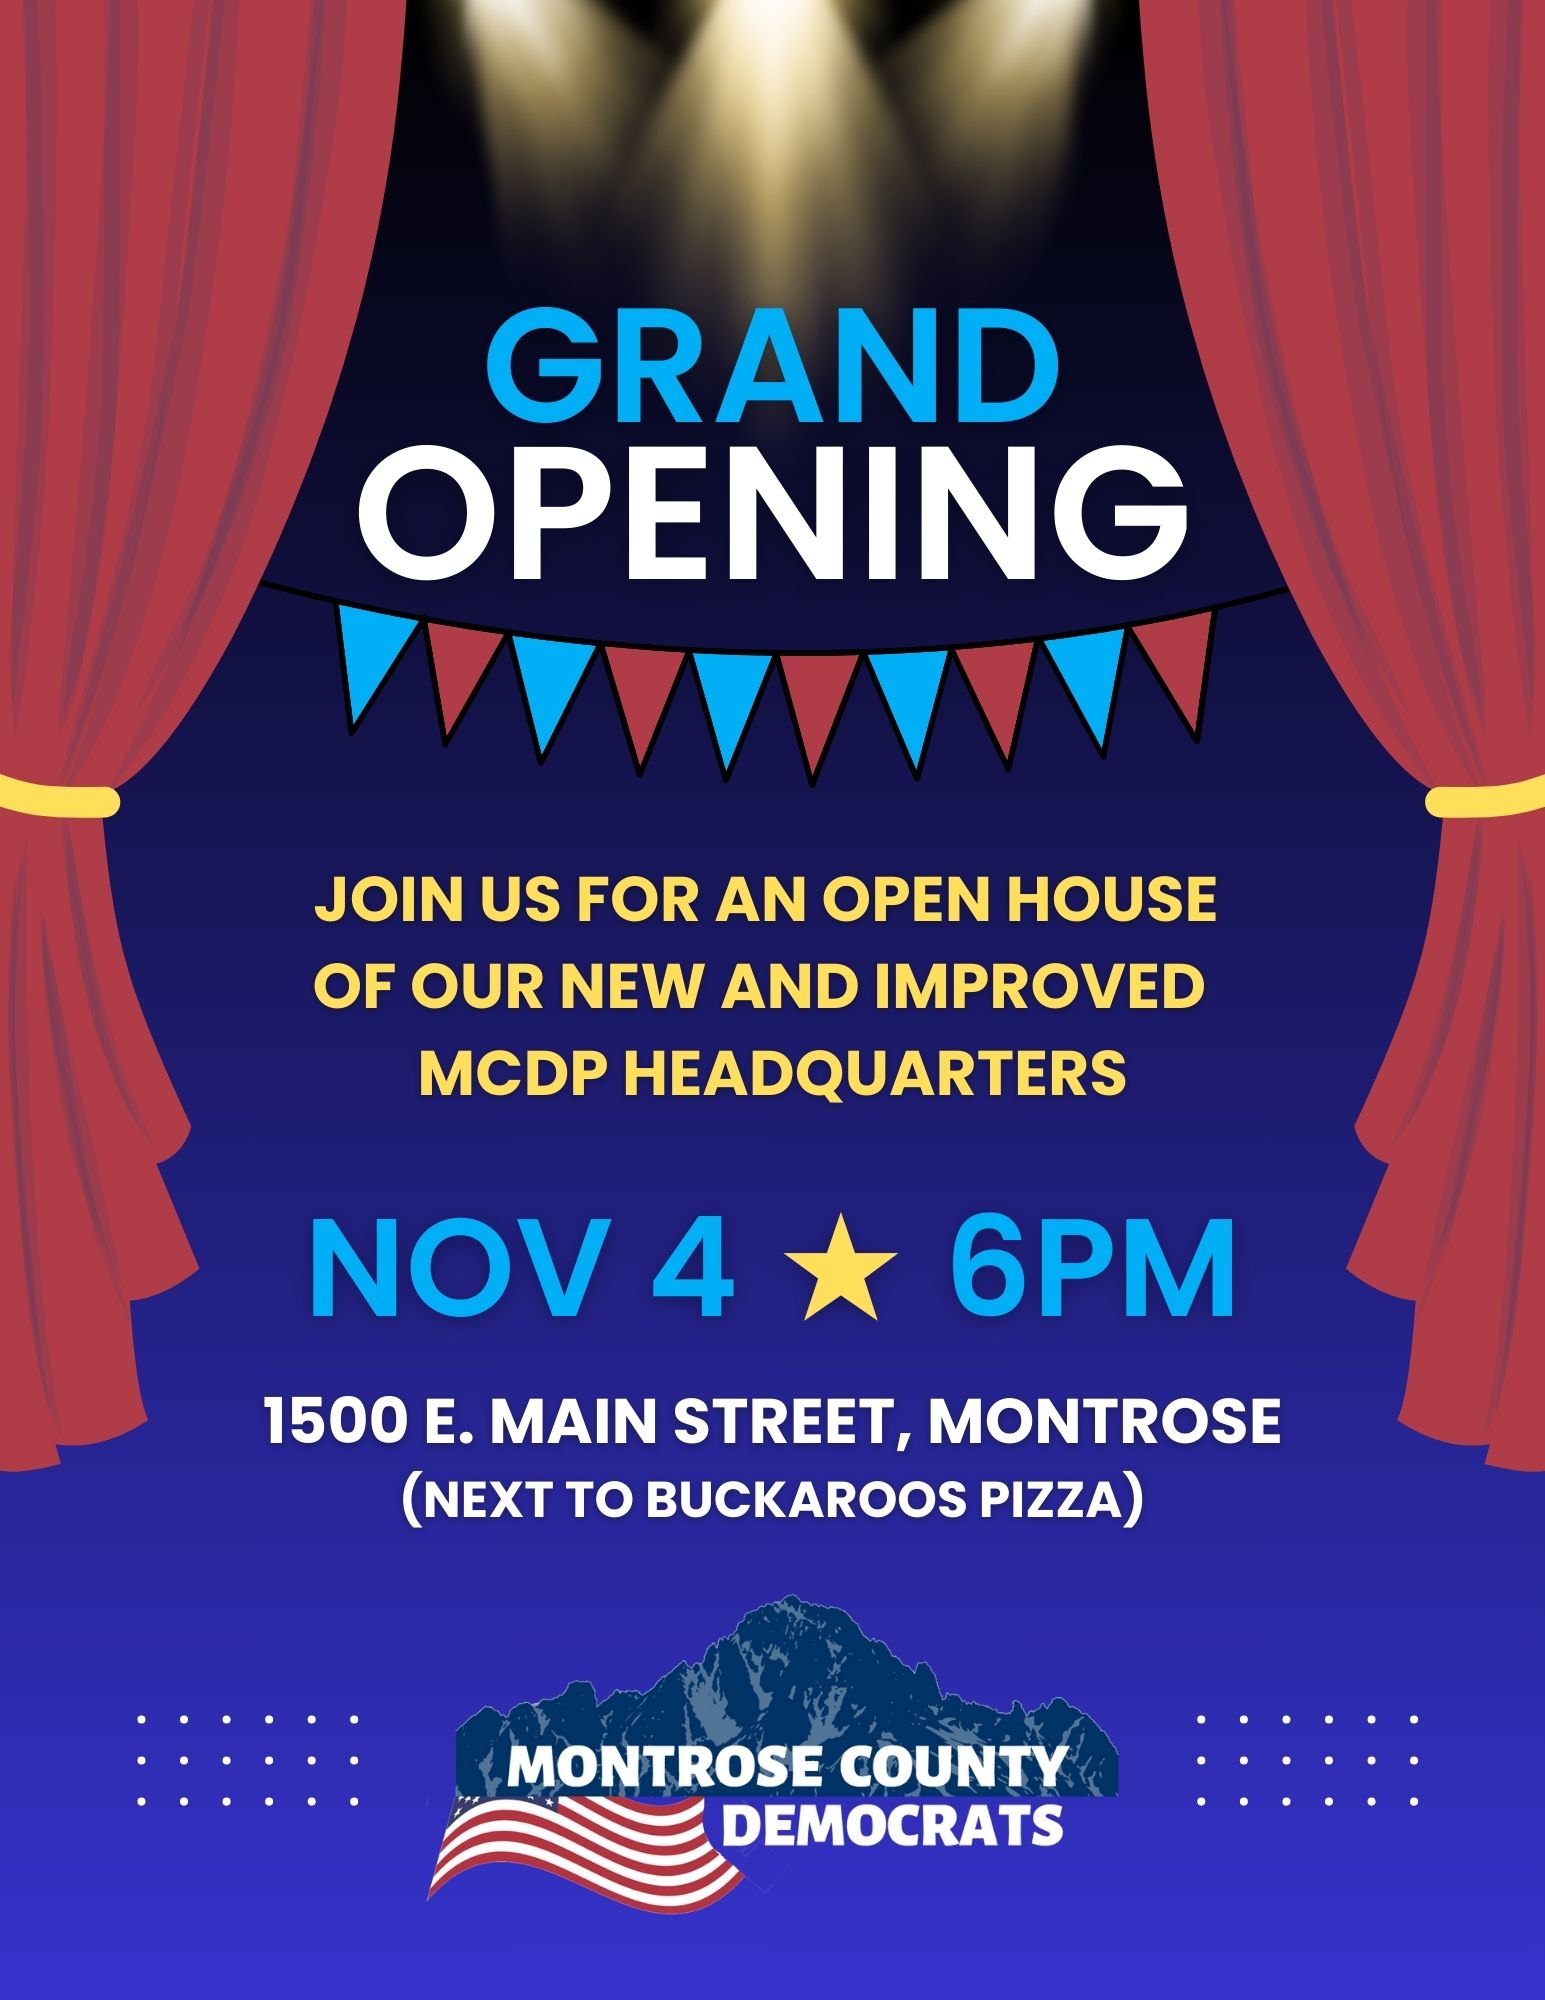 Save the date and join us in our new office at 1500 E. Main Street, next to Buckaroos Pizza and the House of Spirits on Saturday, November 4th at 6:00 PM.